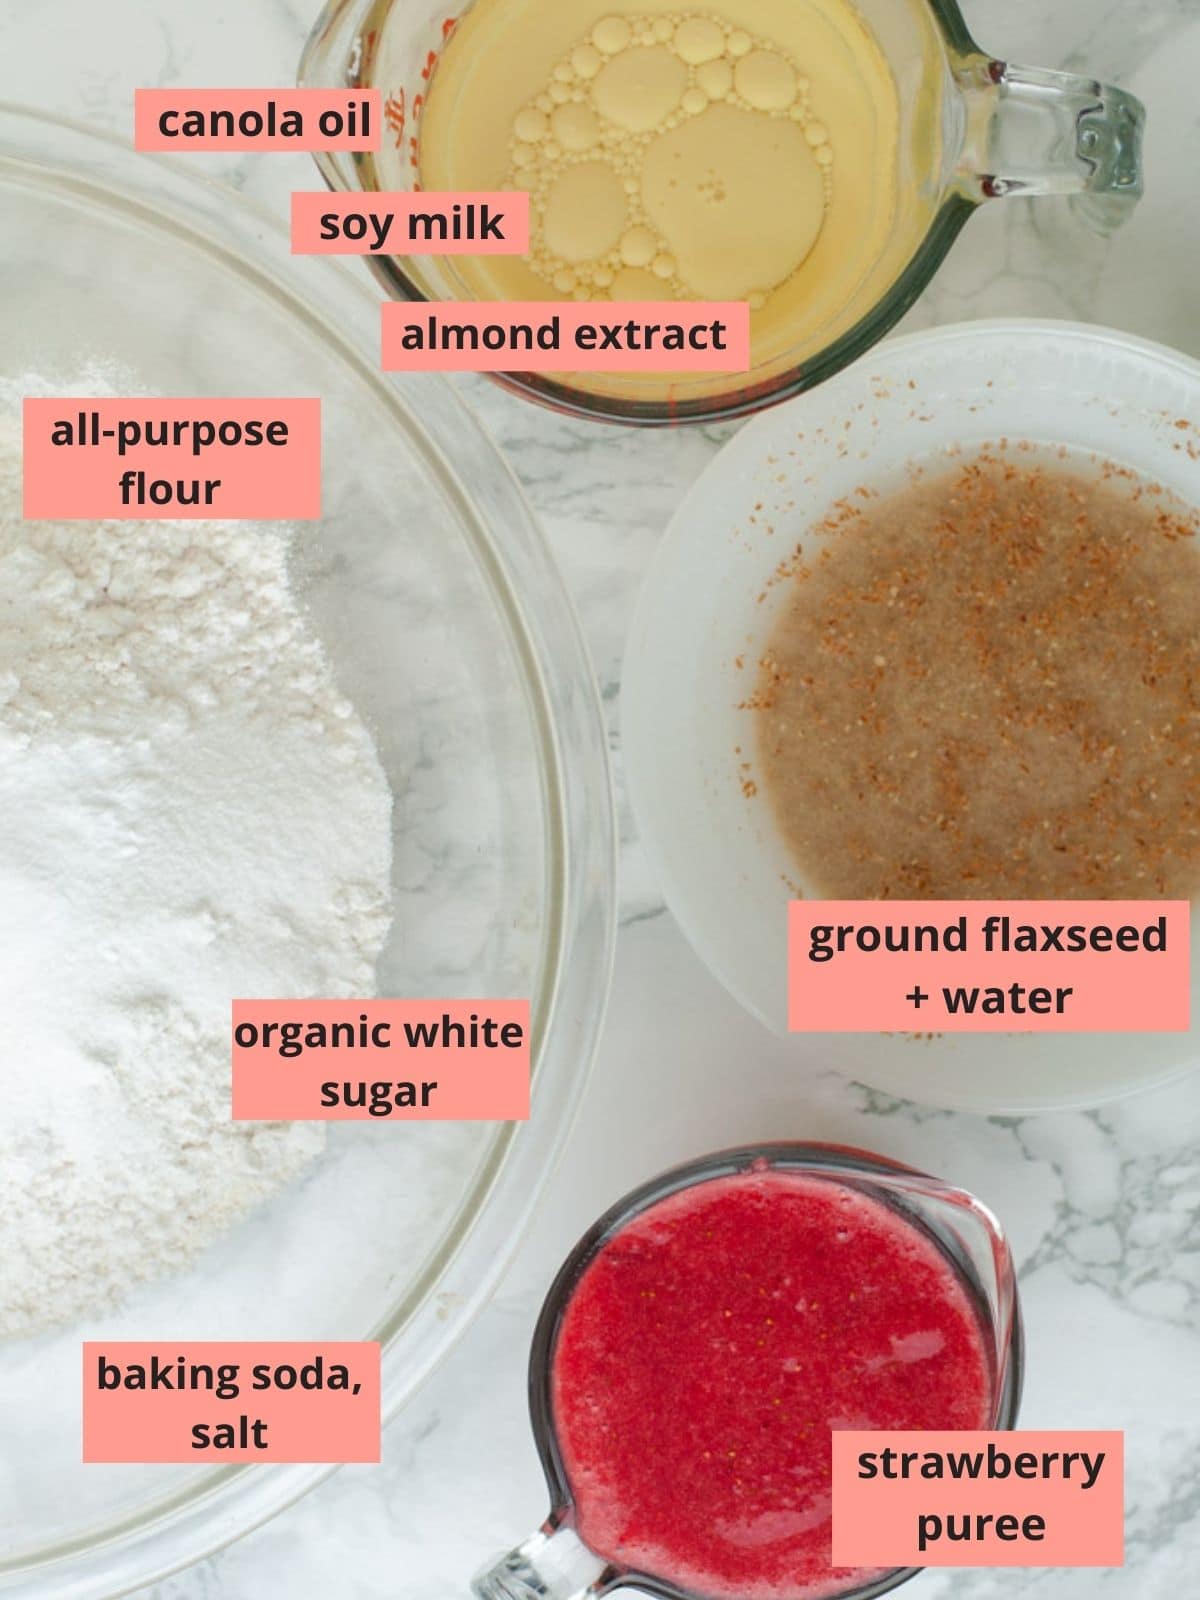 Labeled ingredients used to make strawberry cake.